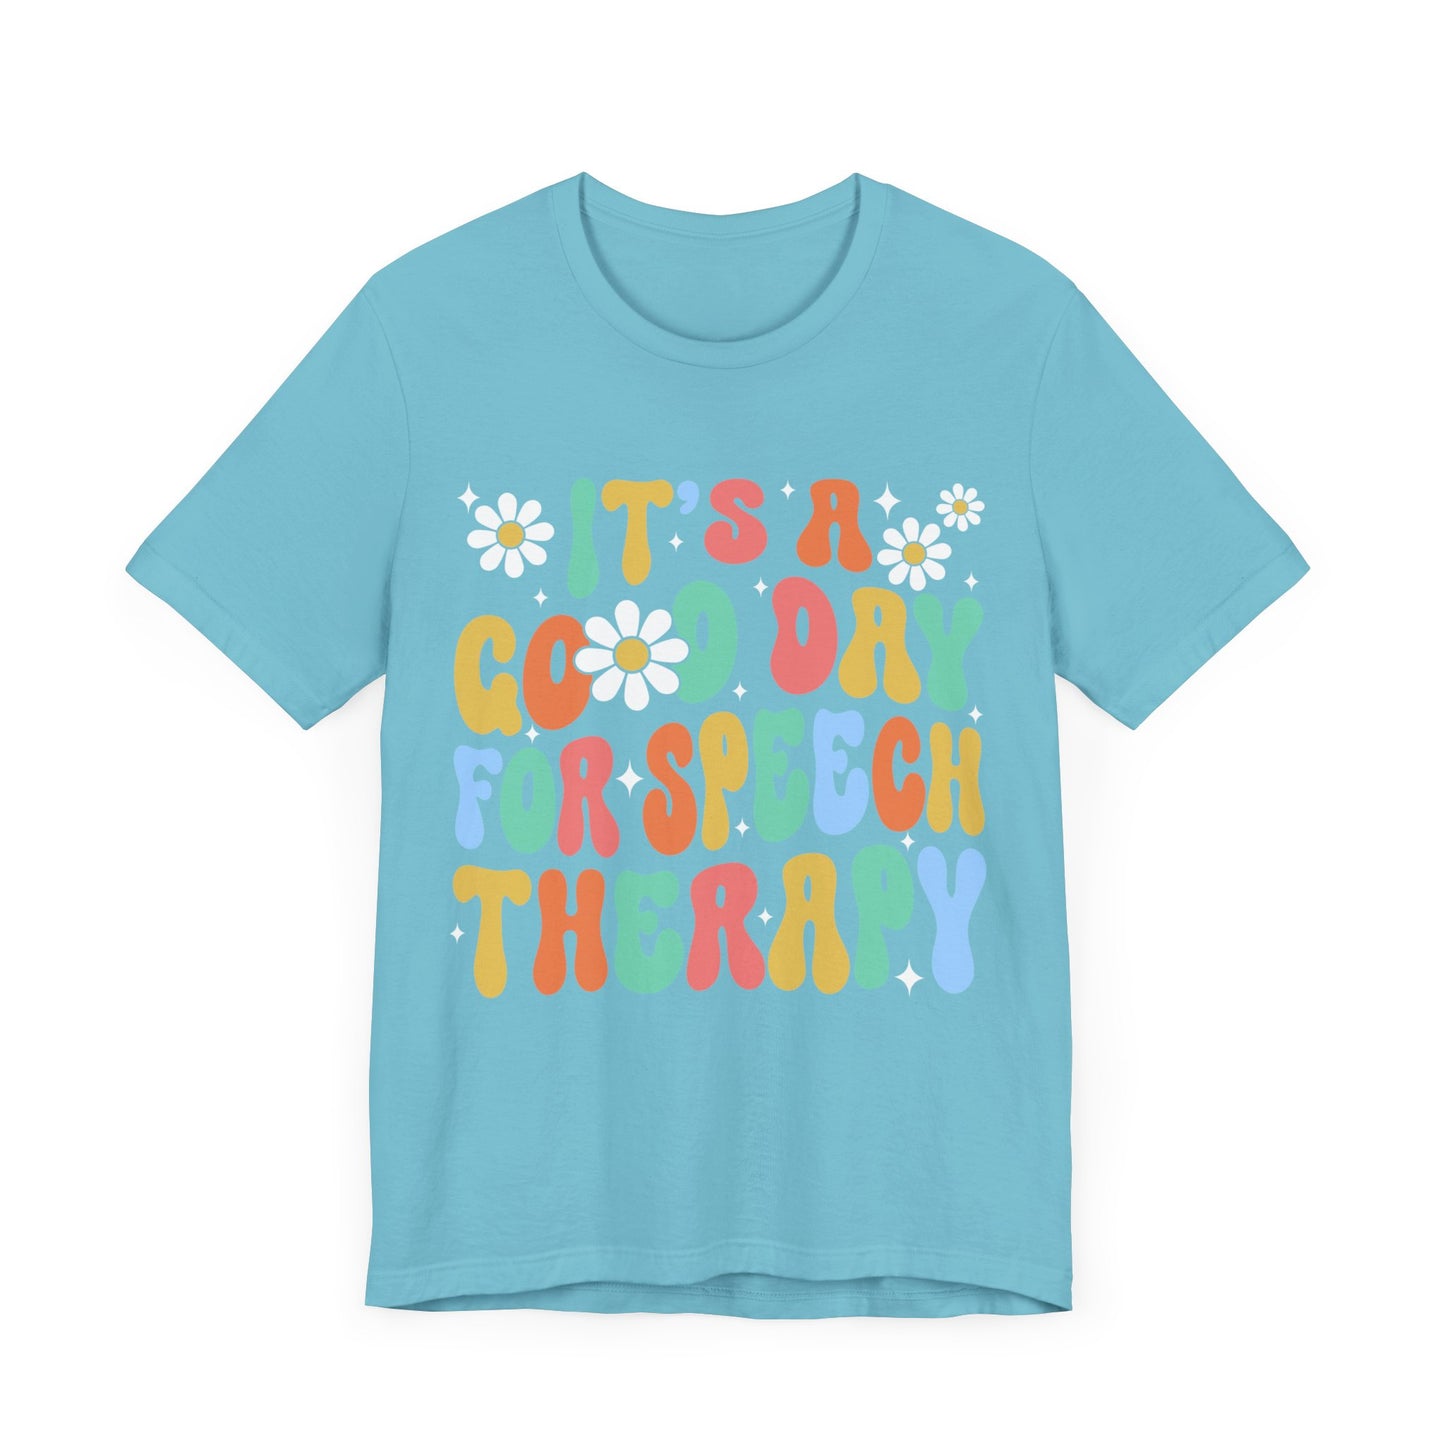 It's A Good Day For Speech Therapy Shirt, SLP Shirt, Therapist Shirt, Pathologist Shirt